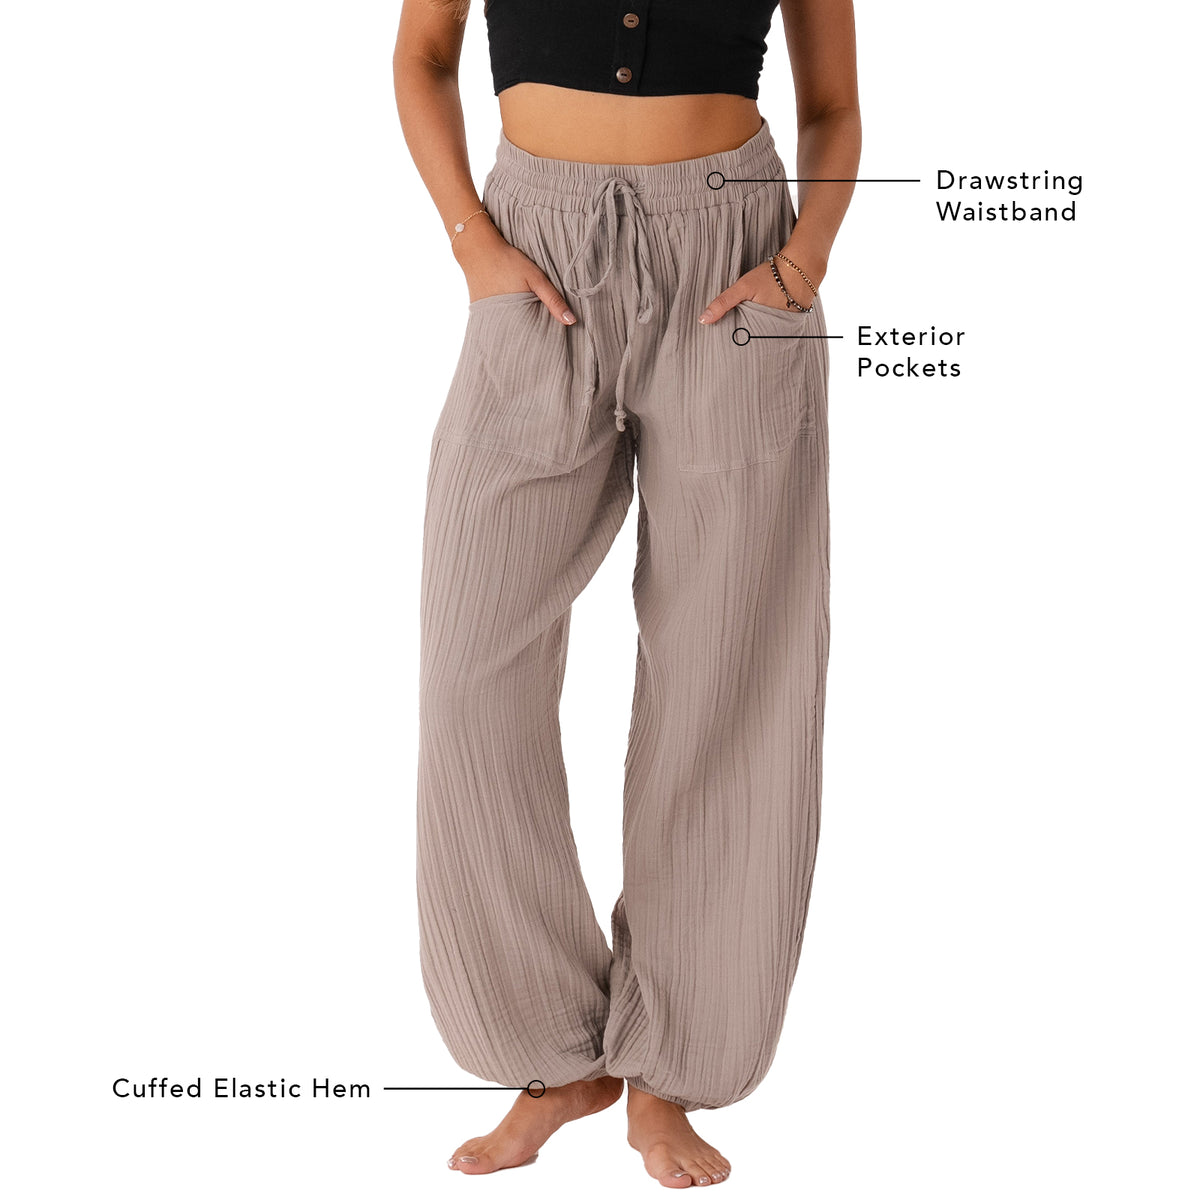 Model wearing stone colored harem pants with a drawstring waistband. The photo outlines the features of the pants including a drawstring waistband, exterior pockets and a cuffed elastic bottom hem